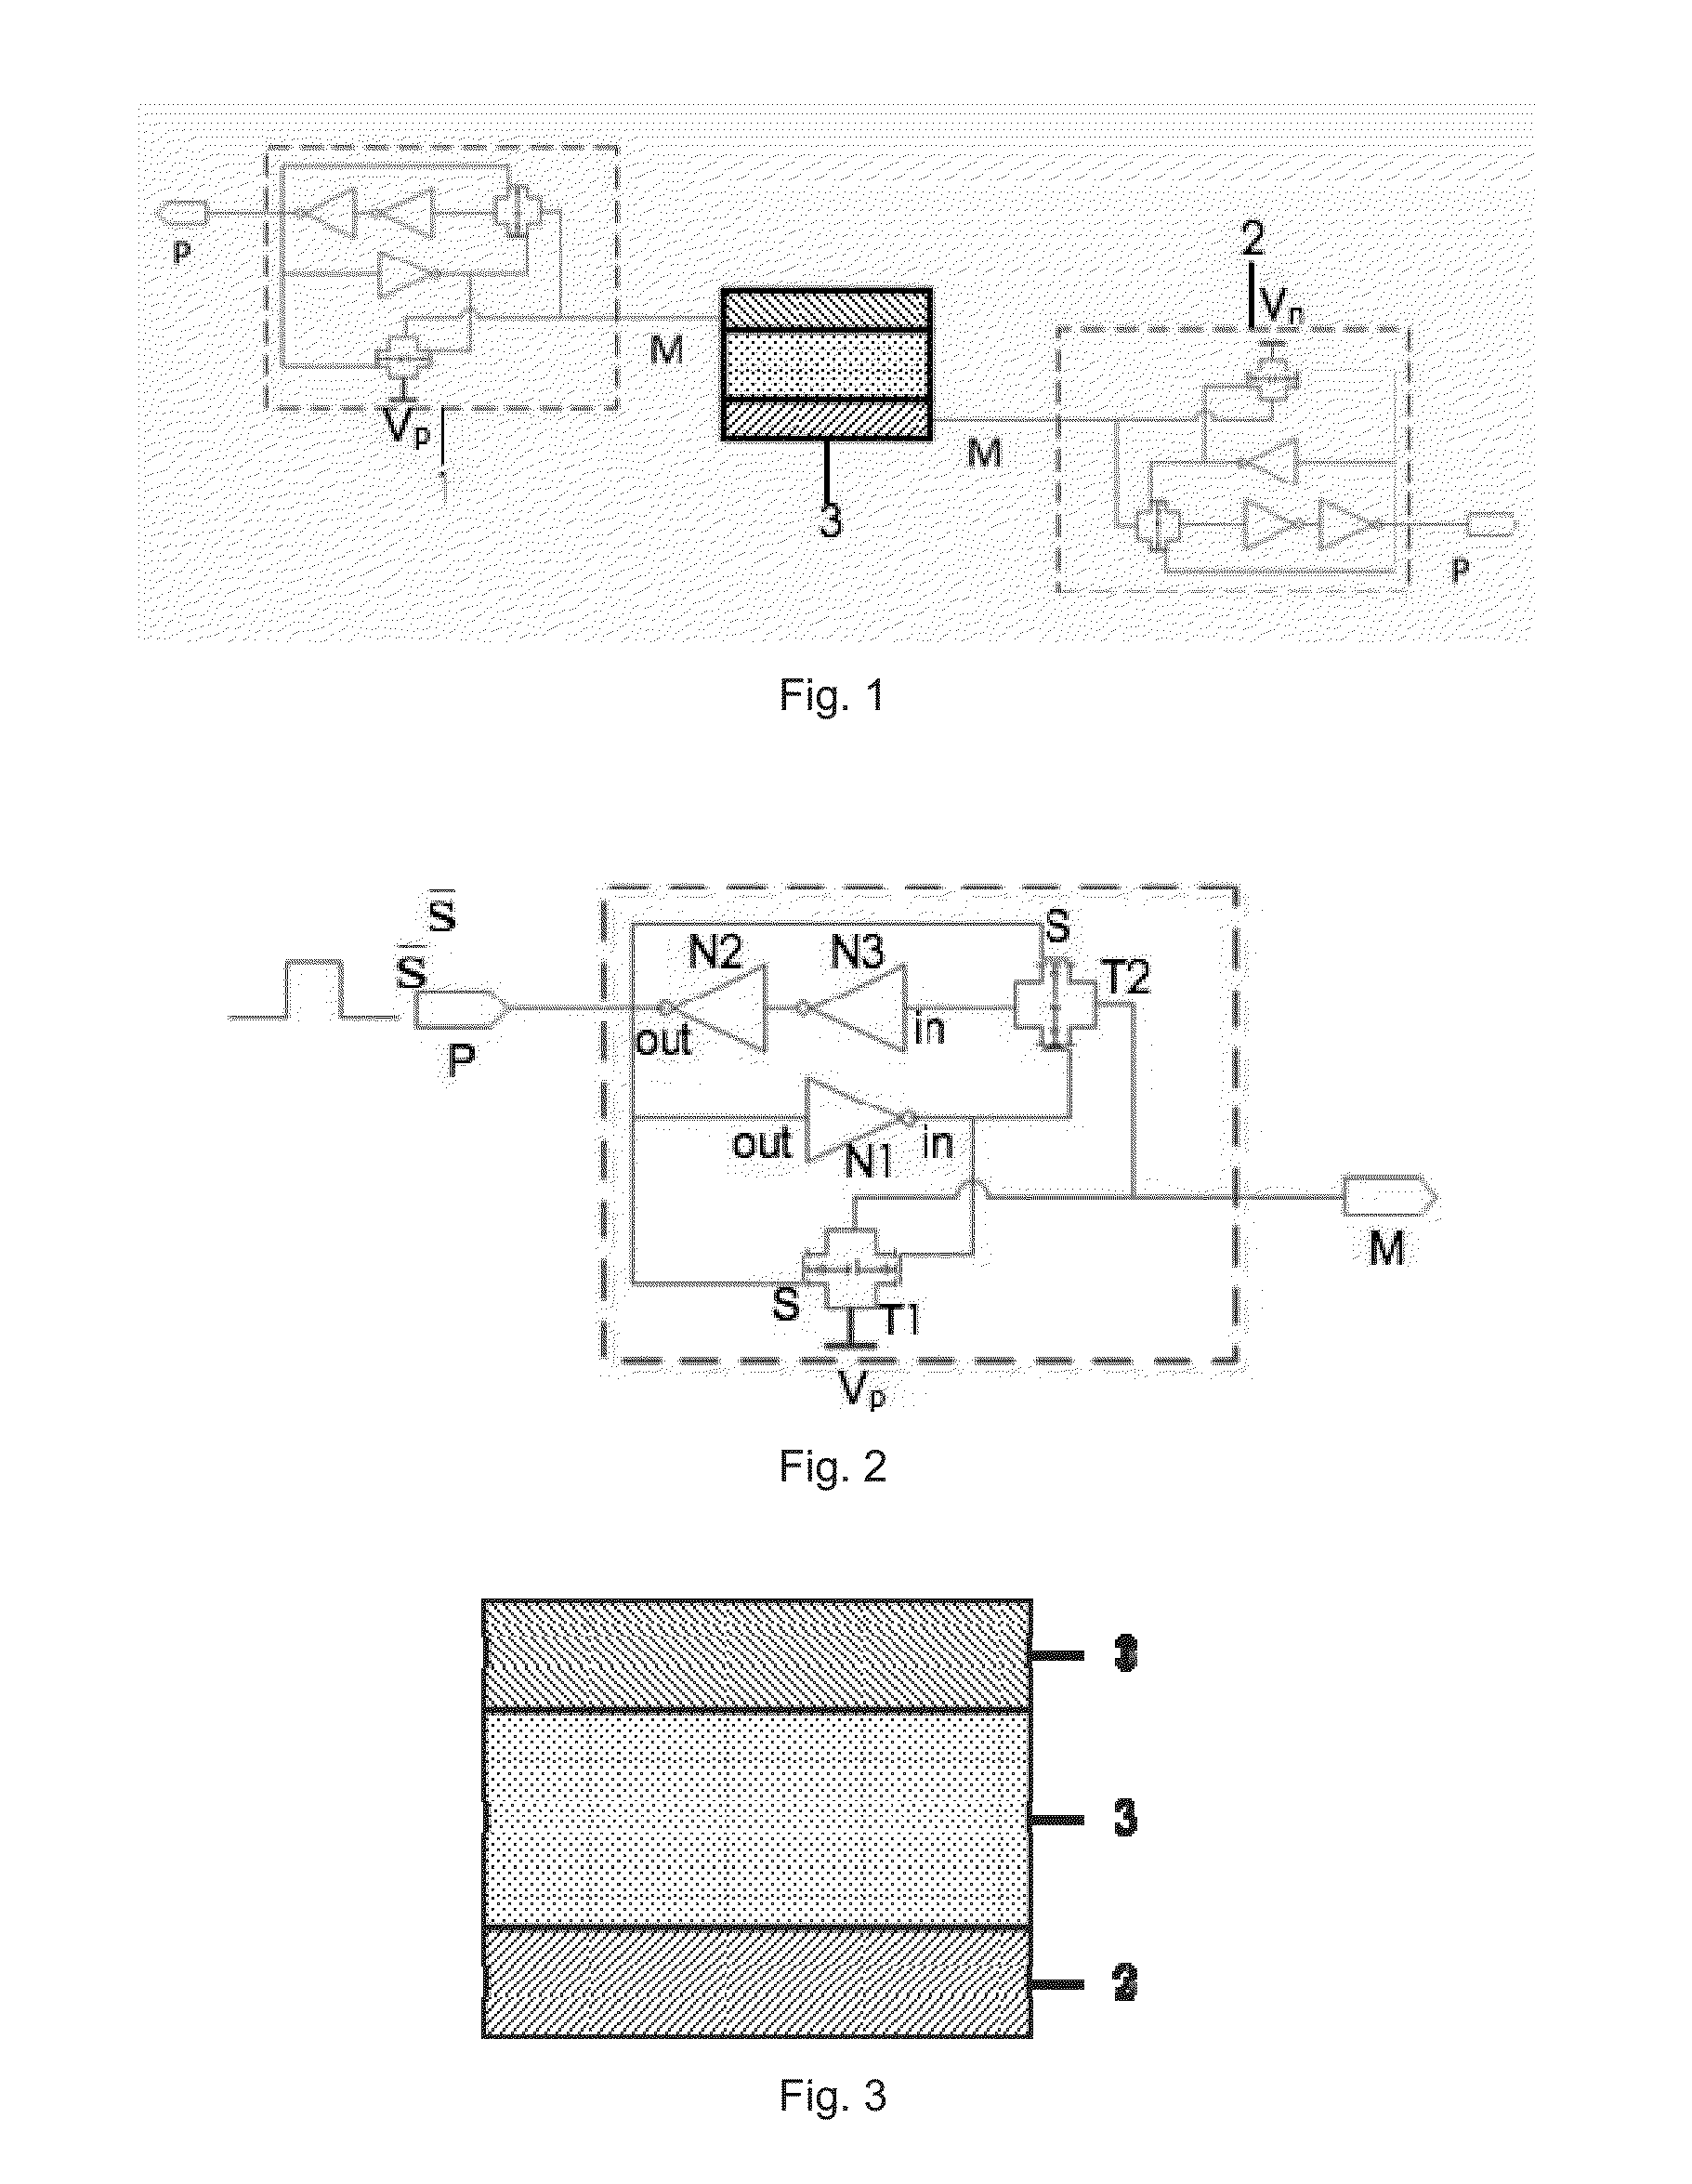 Time Correlation Learning Neuron Circuit Based on a Resistive Memristor and an Implementation Method Thereof